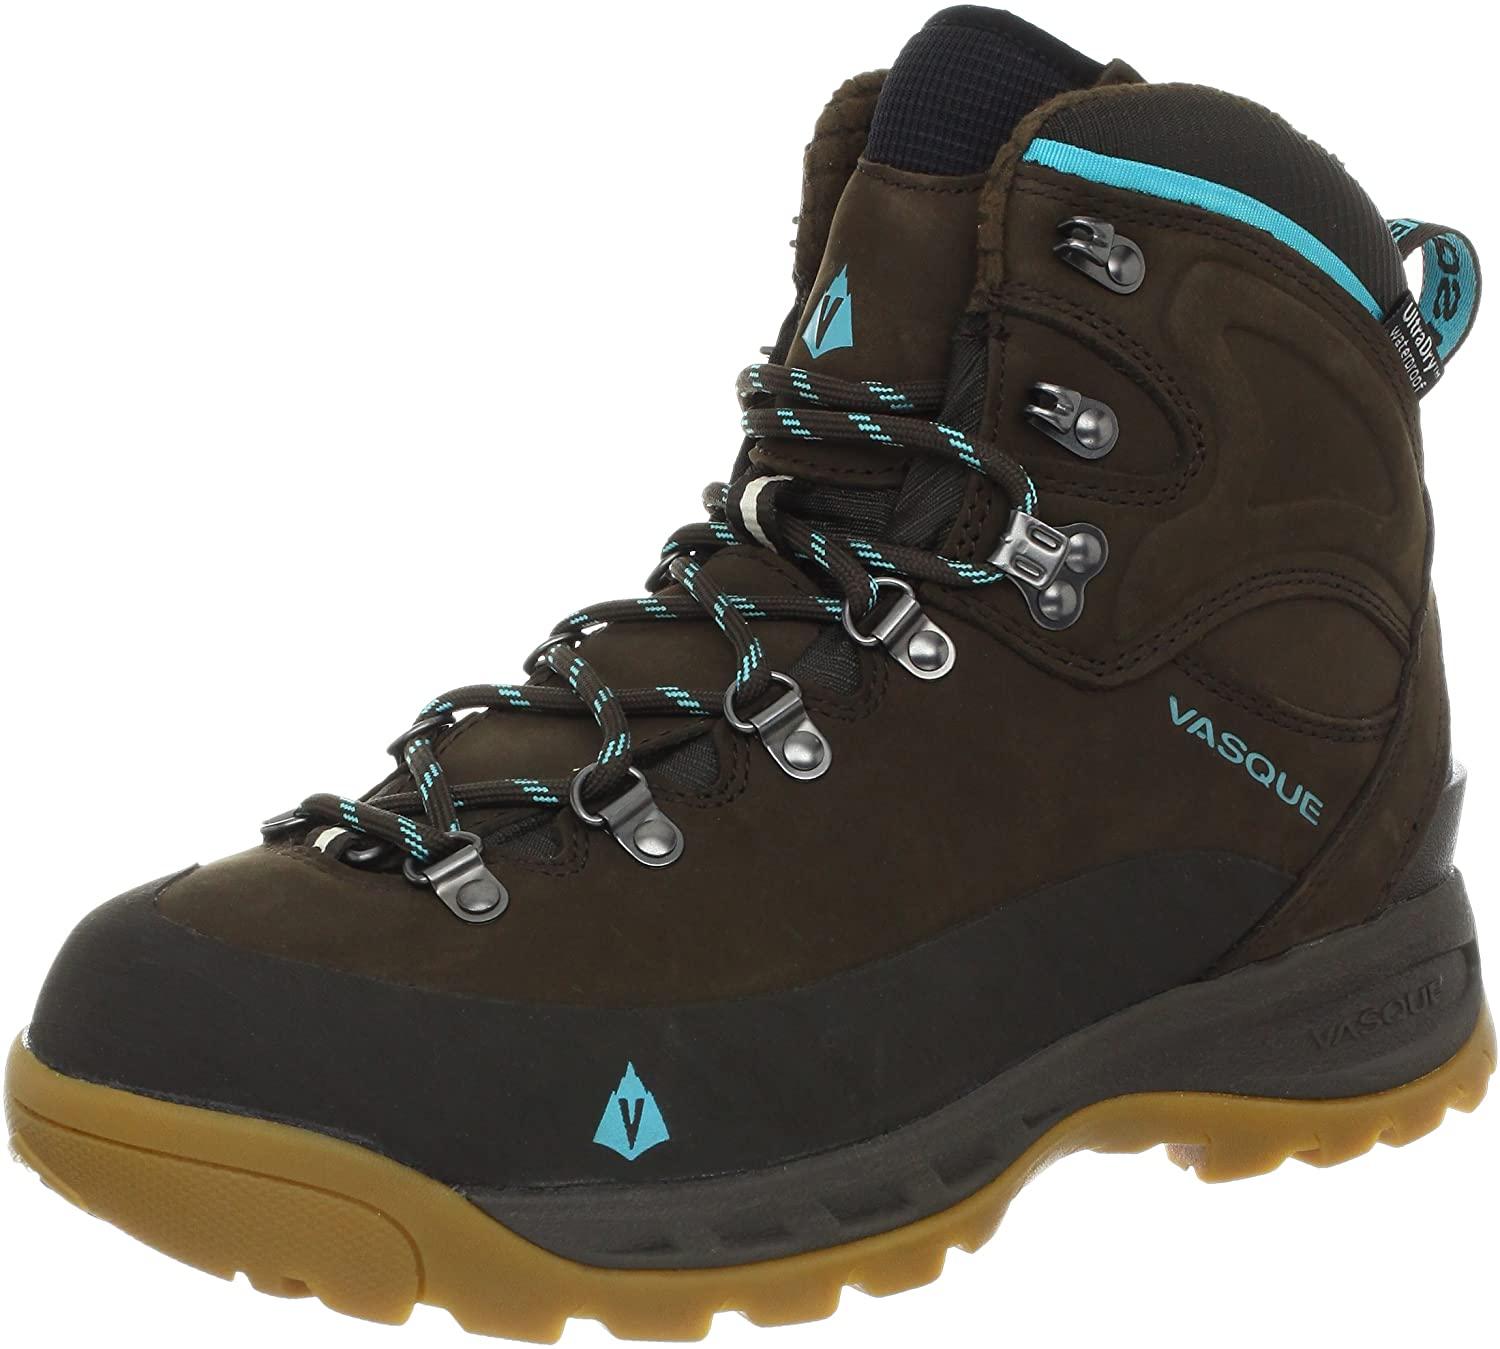 Vasque Womens Snowblime Winter Hiking Boot for $37.49 Shipped